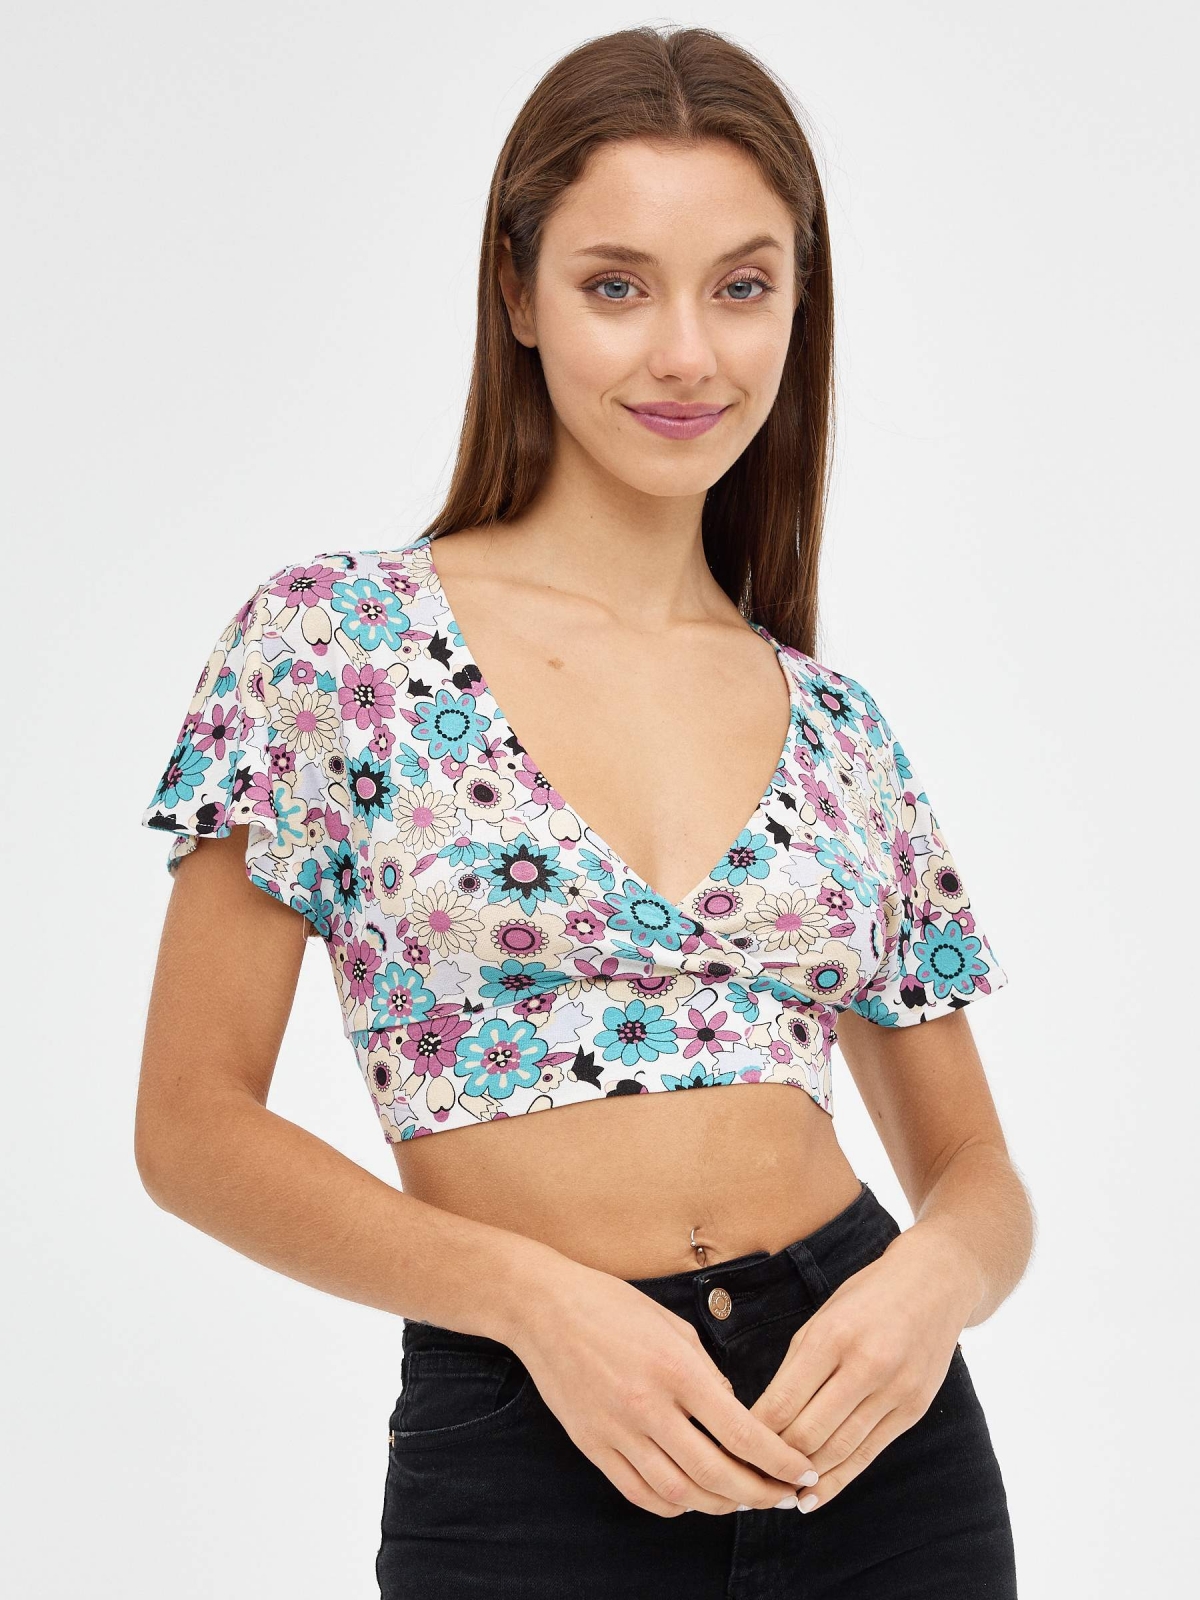 Flower crop top with bow white middle front view